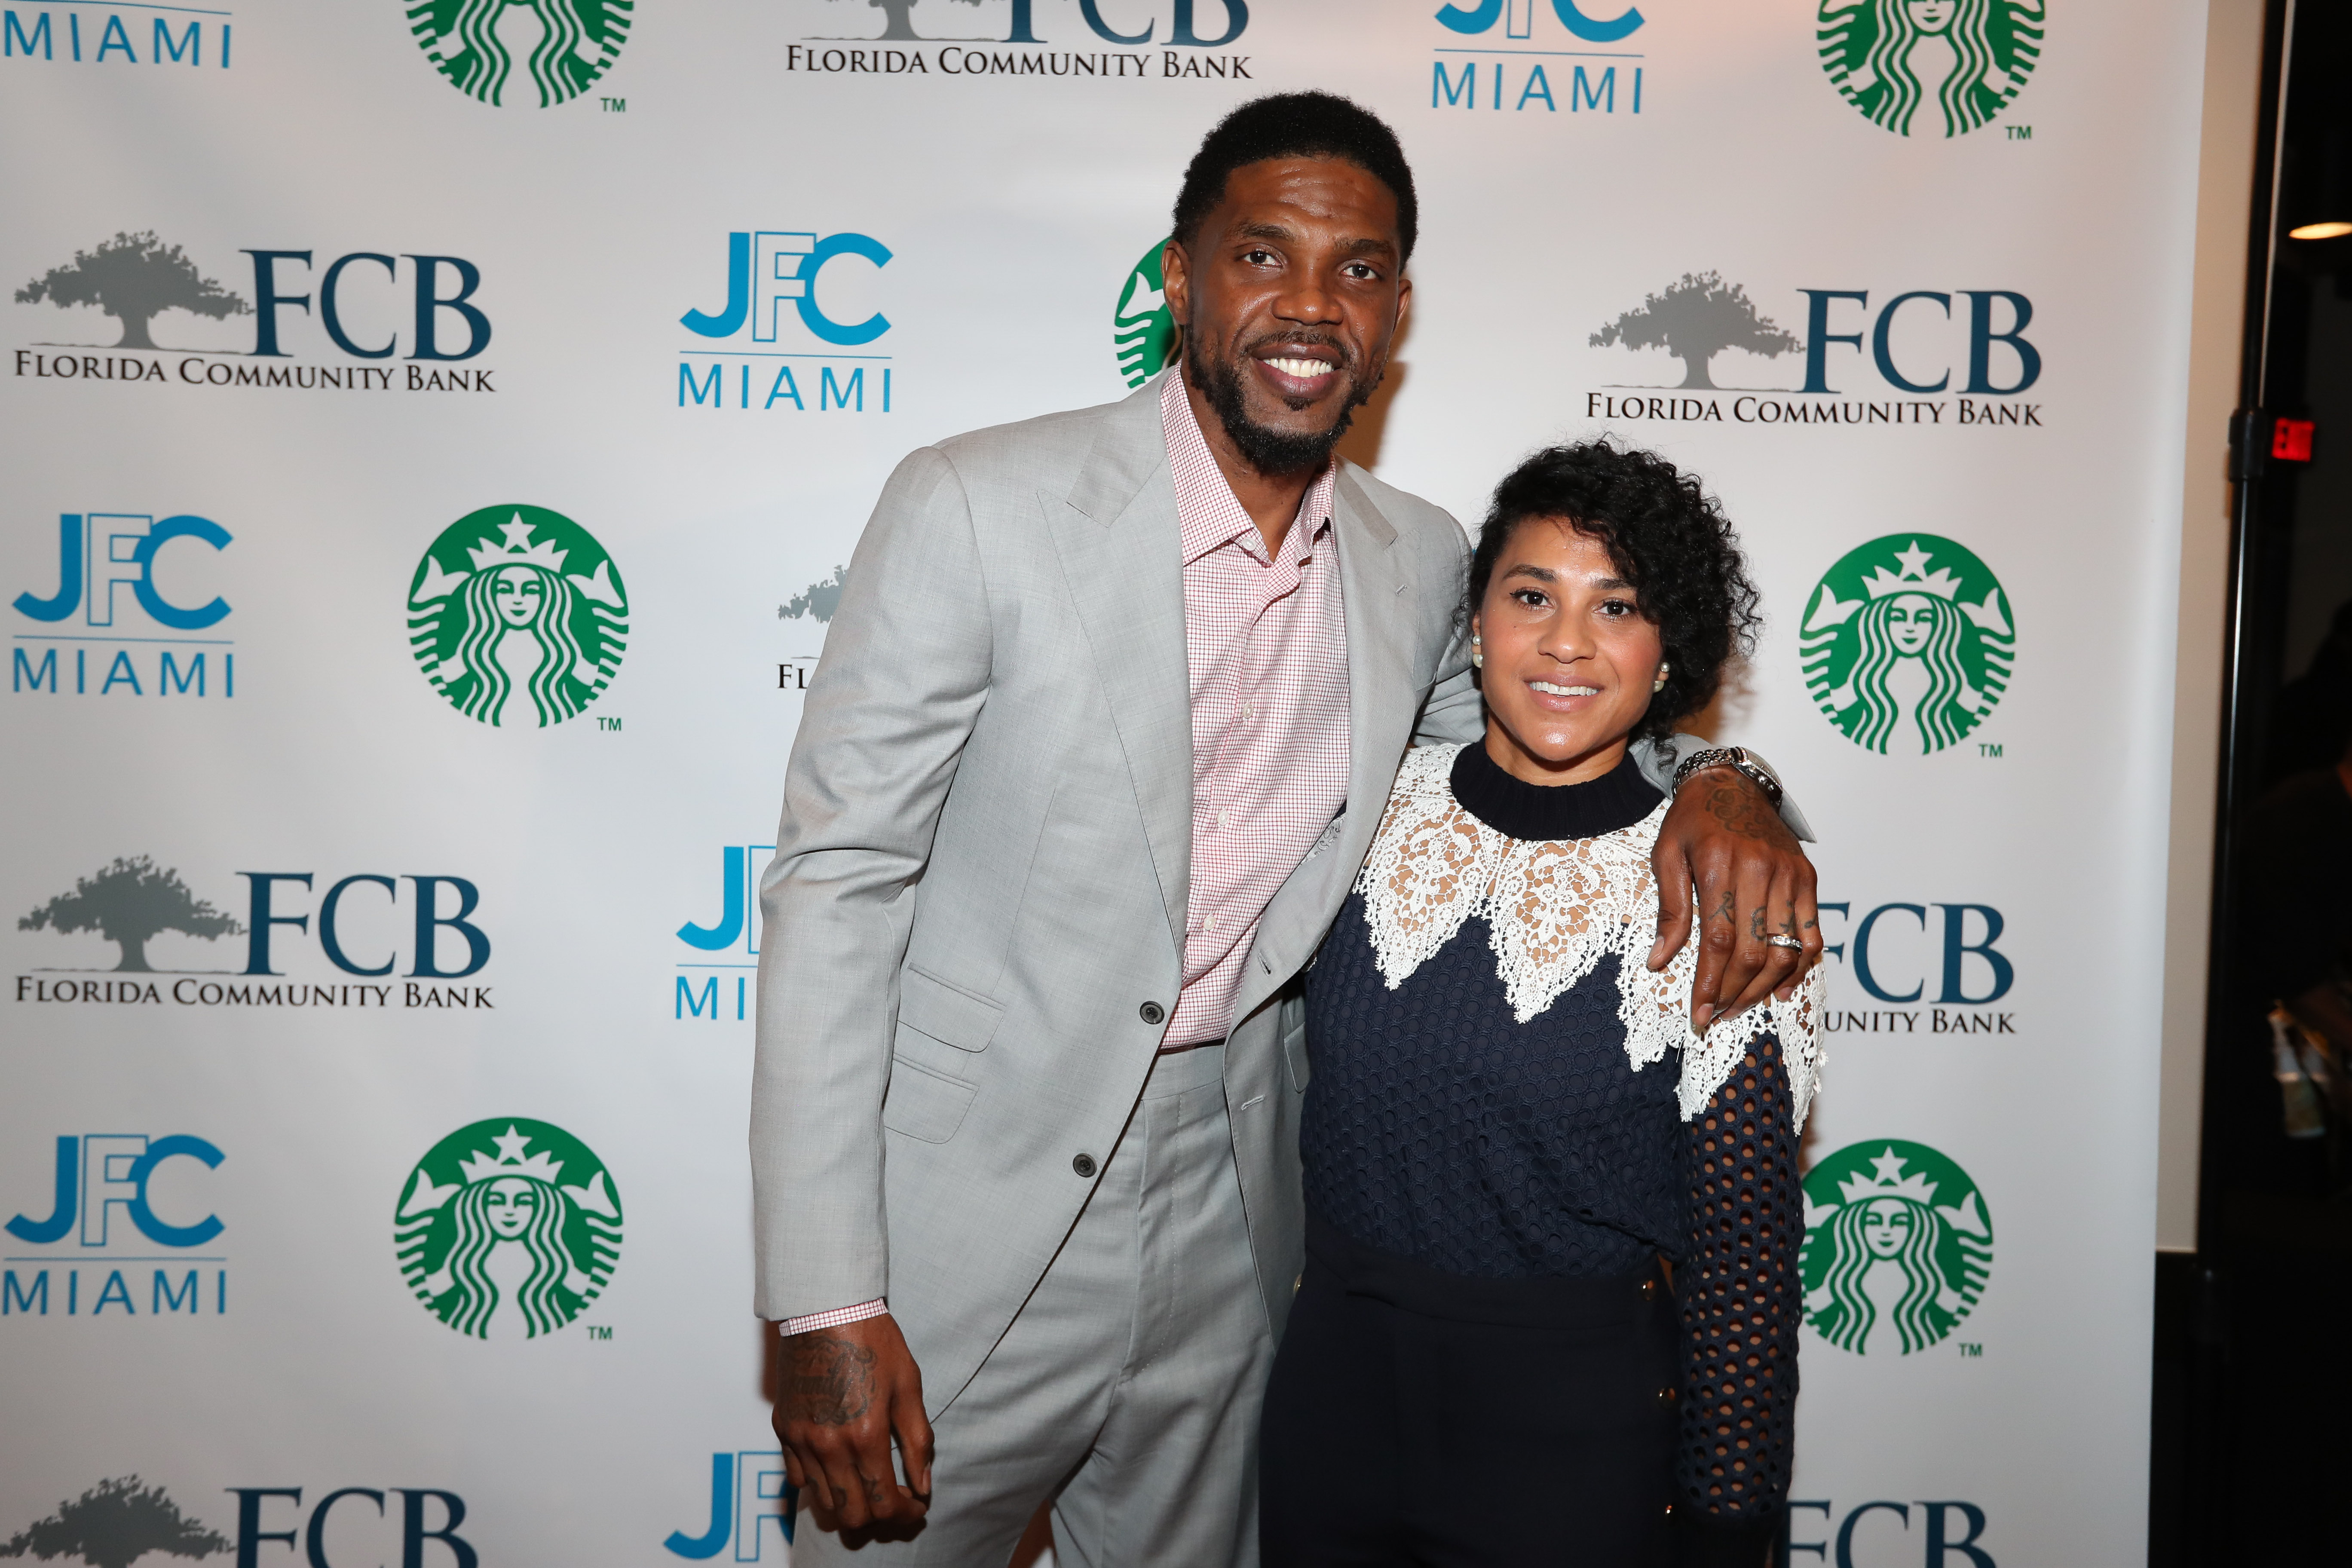 Udonis and Faith Haslem at the  VIP preview of Starbucks hosted by the basketball player at Jackson Memorial Medical Center on October 24, 2016, in Miami, Florida. | Source: Getty Images